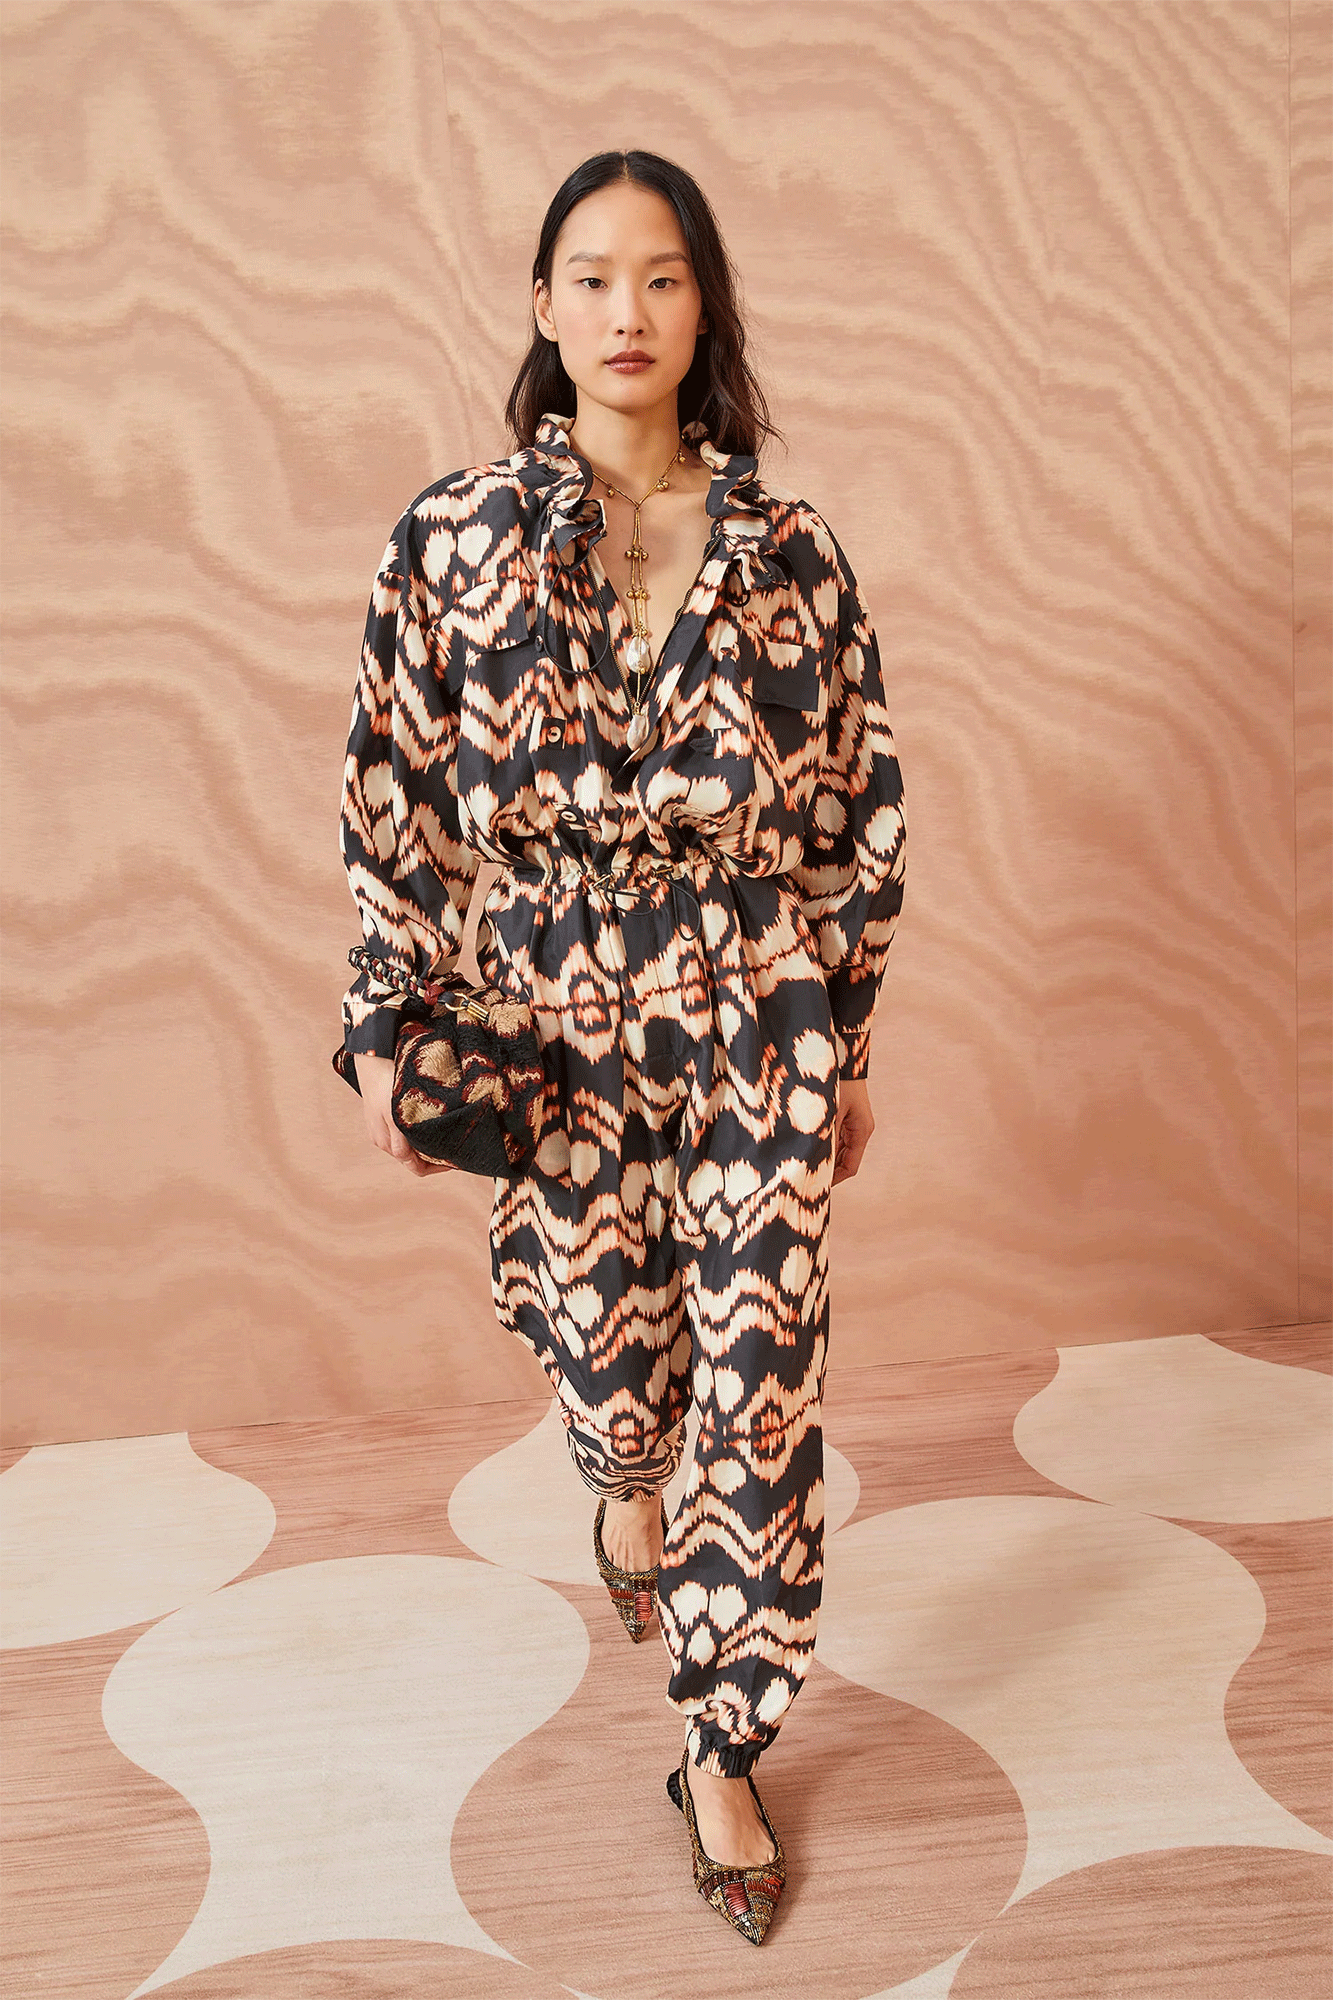 The Aida Jumpsuit from Ulla Johnson is designed with statement-making details in mind, from the printed silk taffeta in an ikat-inspired graphic stripe to the peony-inspired ruffled collar, buttoned cuffs, and elastic nipped-in waist adorned with a bungee cord.